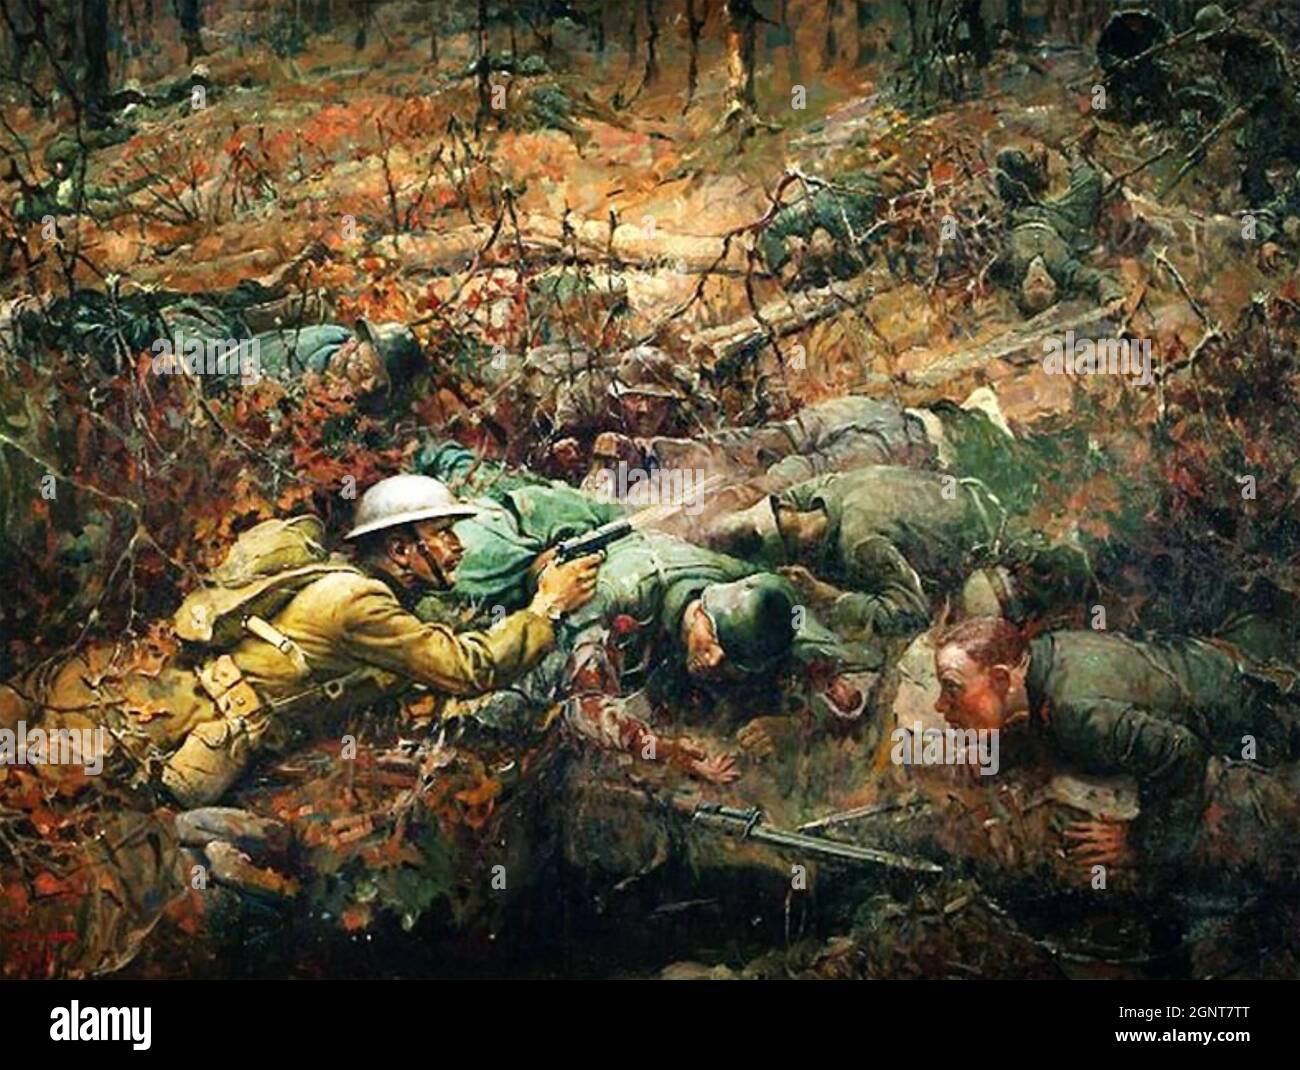 ALVIN YORK (1887-1964) one of the most decorated American soldiers of the First World War. The 1919 painting by Frank Schoonover showing York in his Medal of Honor action on 8 October 1918 during the Meuse-Argonne Offensive. Stock Photo